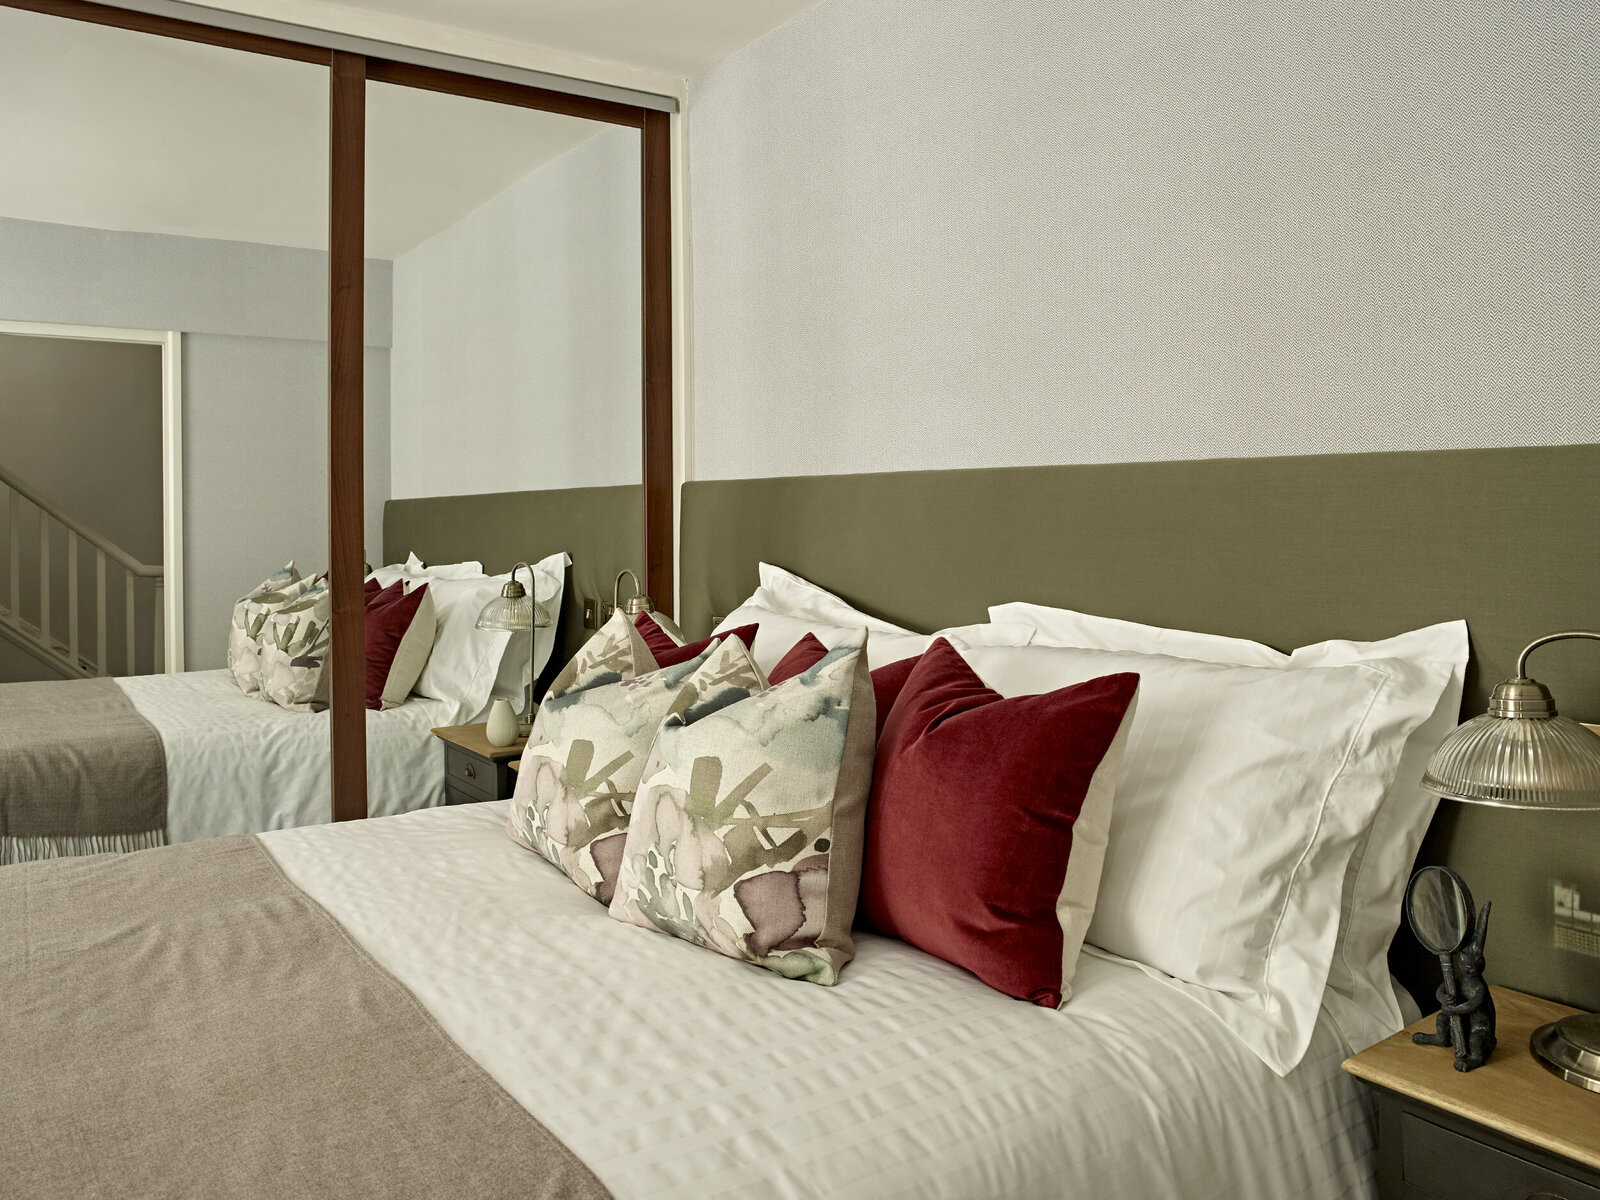 bedroom suite with mirrored wardrobe and maroon pillows on white bed.